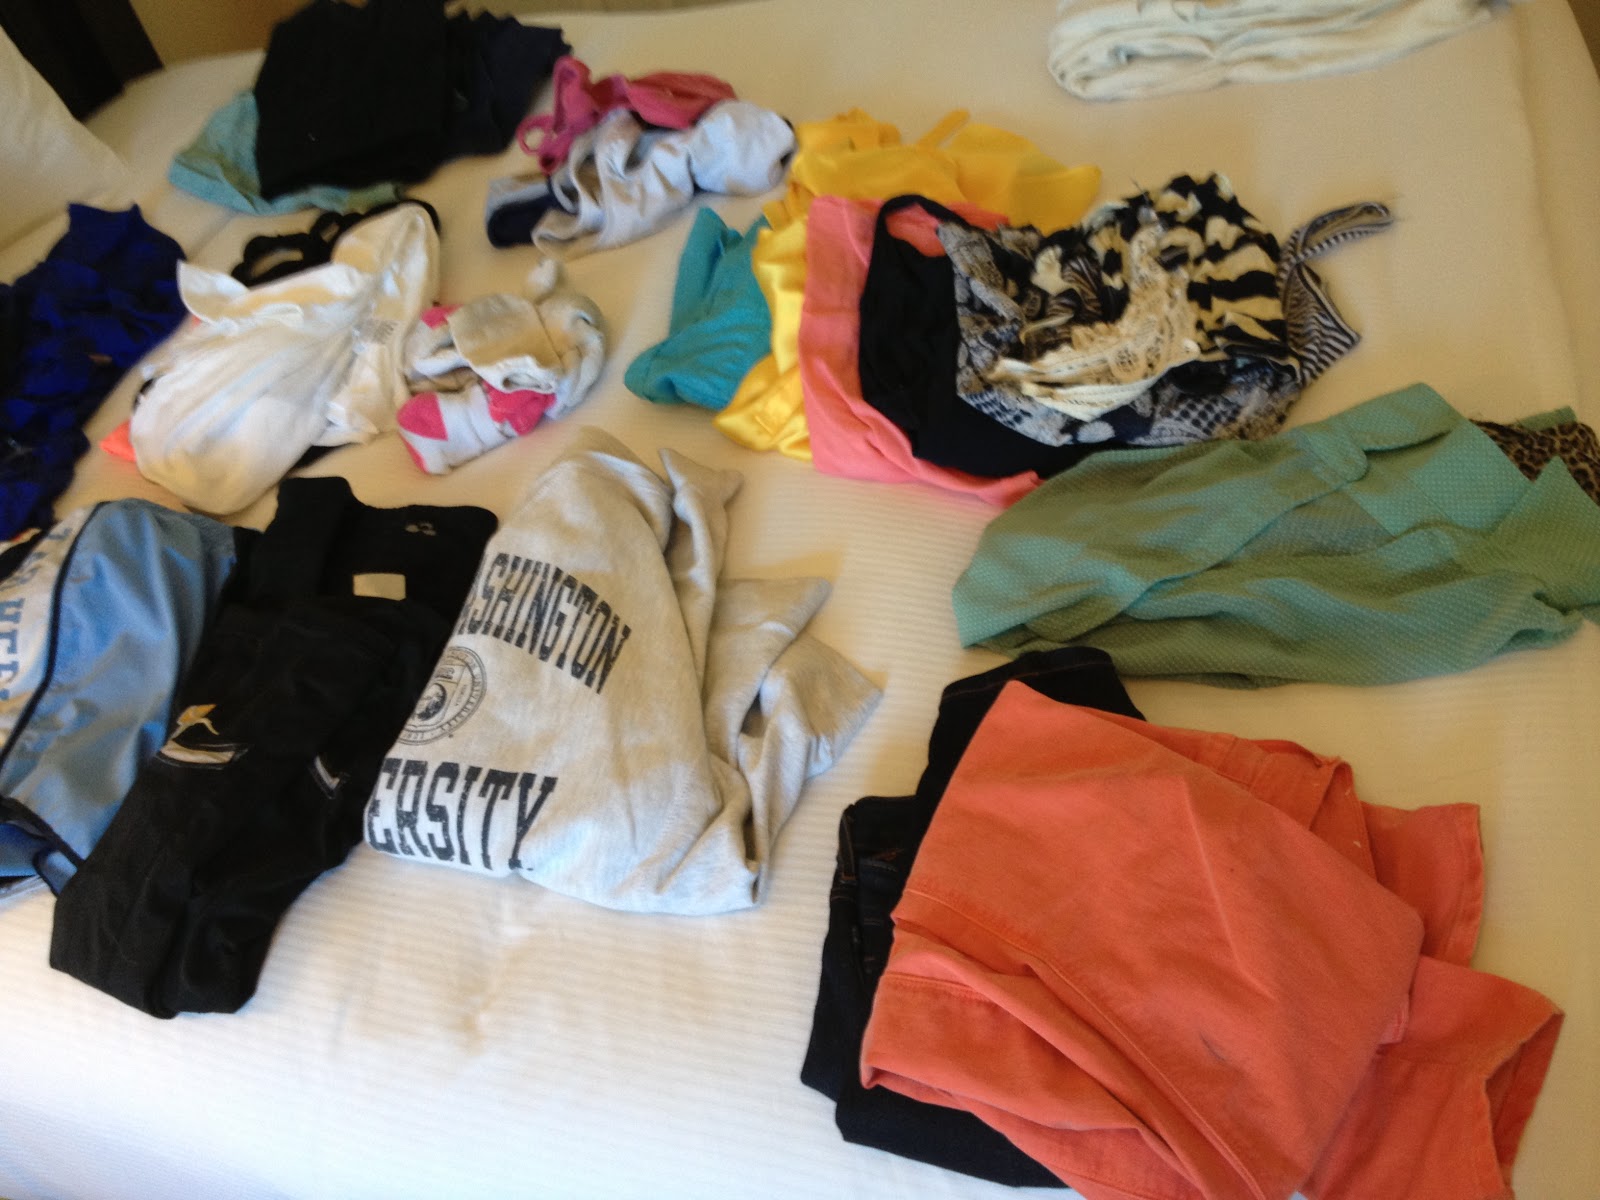 Runner in the Real World: Florida - Packing List